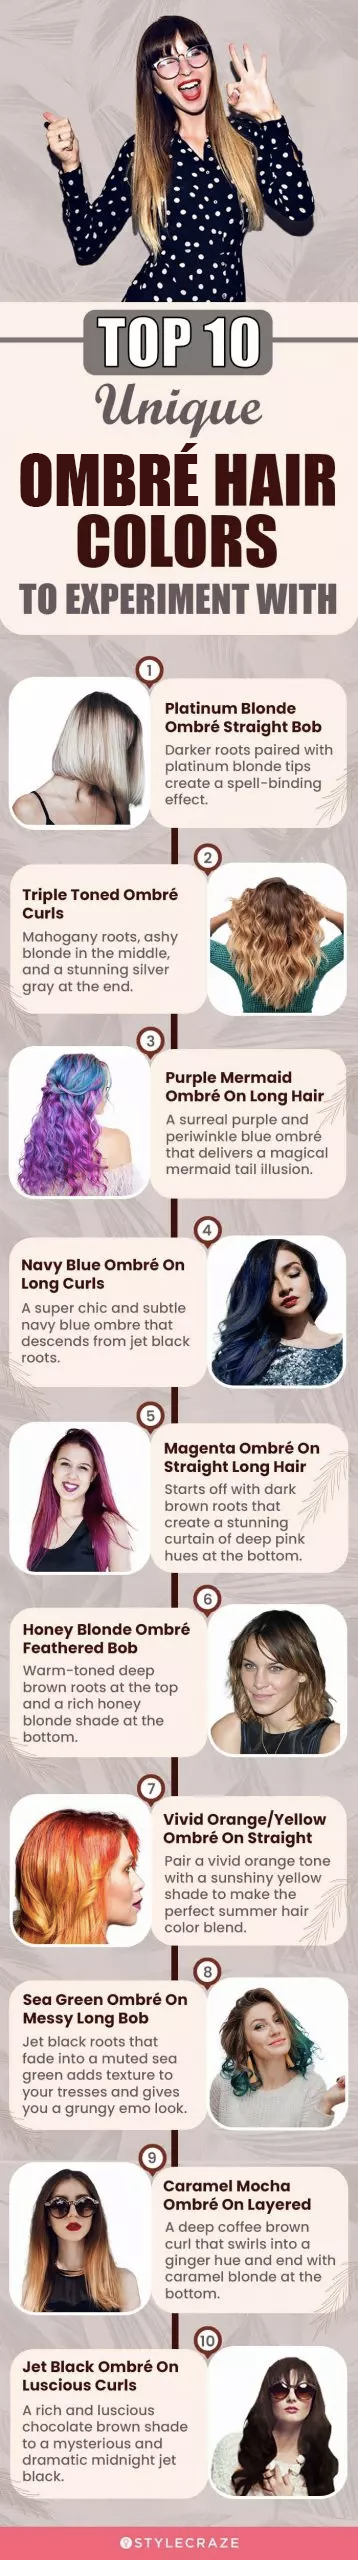 top 10 unique ombre hair colors to experiment with (infographic)